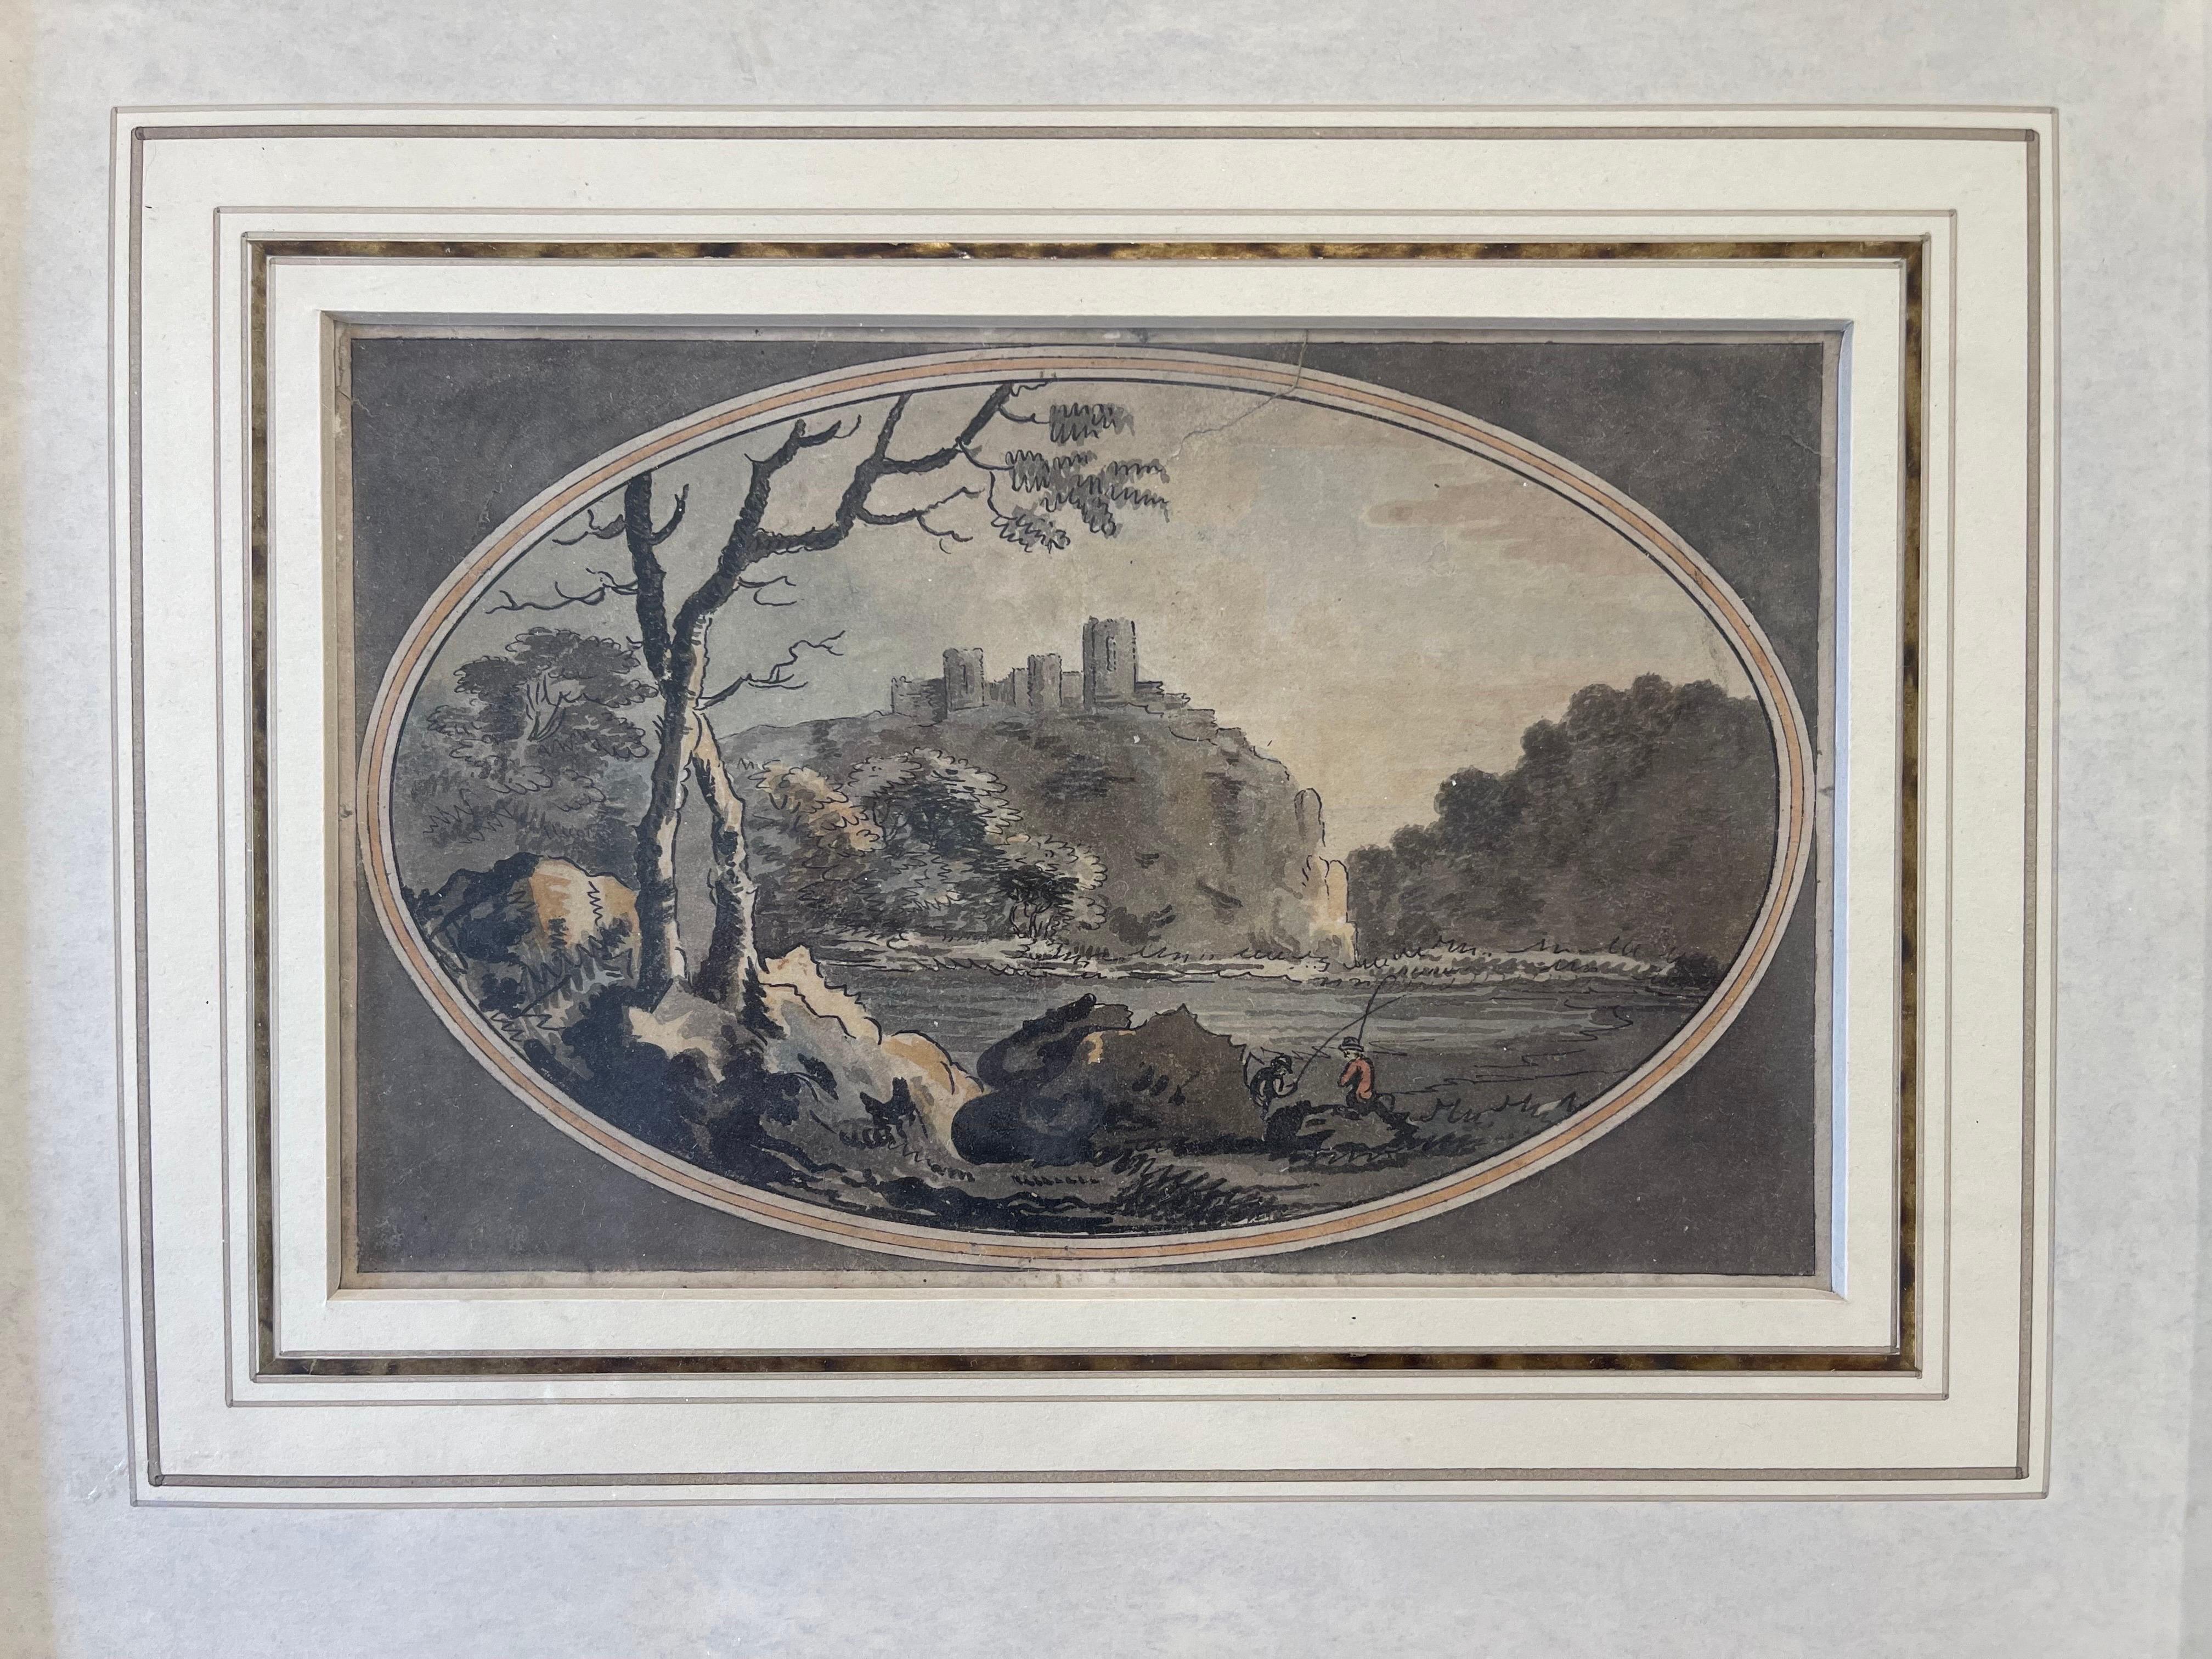 Attributed to the great William Marlow (British, 1740-1813). The ink, graphite and watercolor painting is likely a sketch for a larger work produced by Marlow or someone in his studio. Depicting Carreg Cennen Castle in the background with several